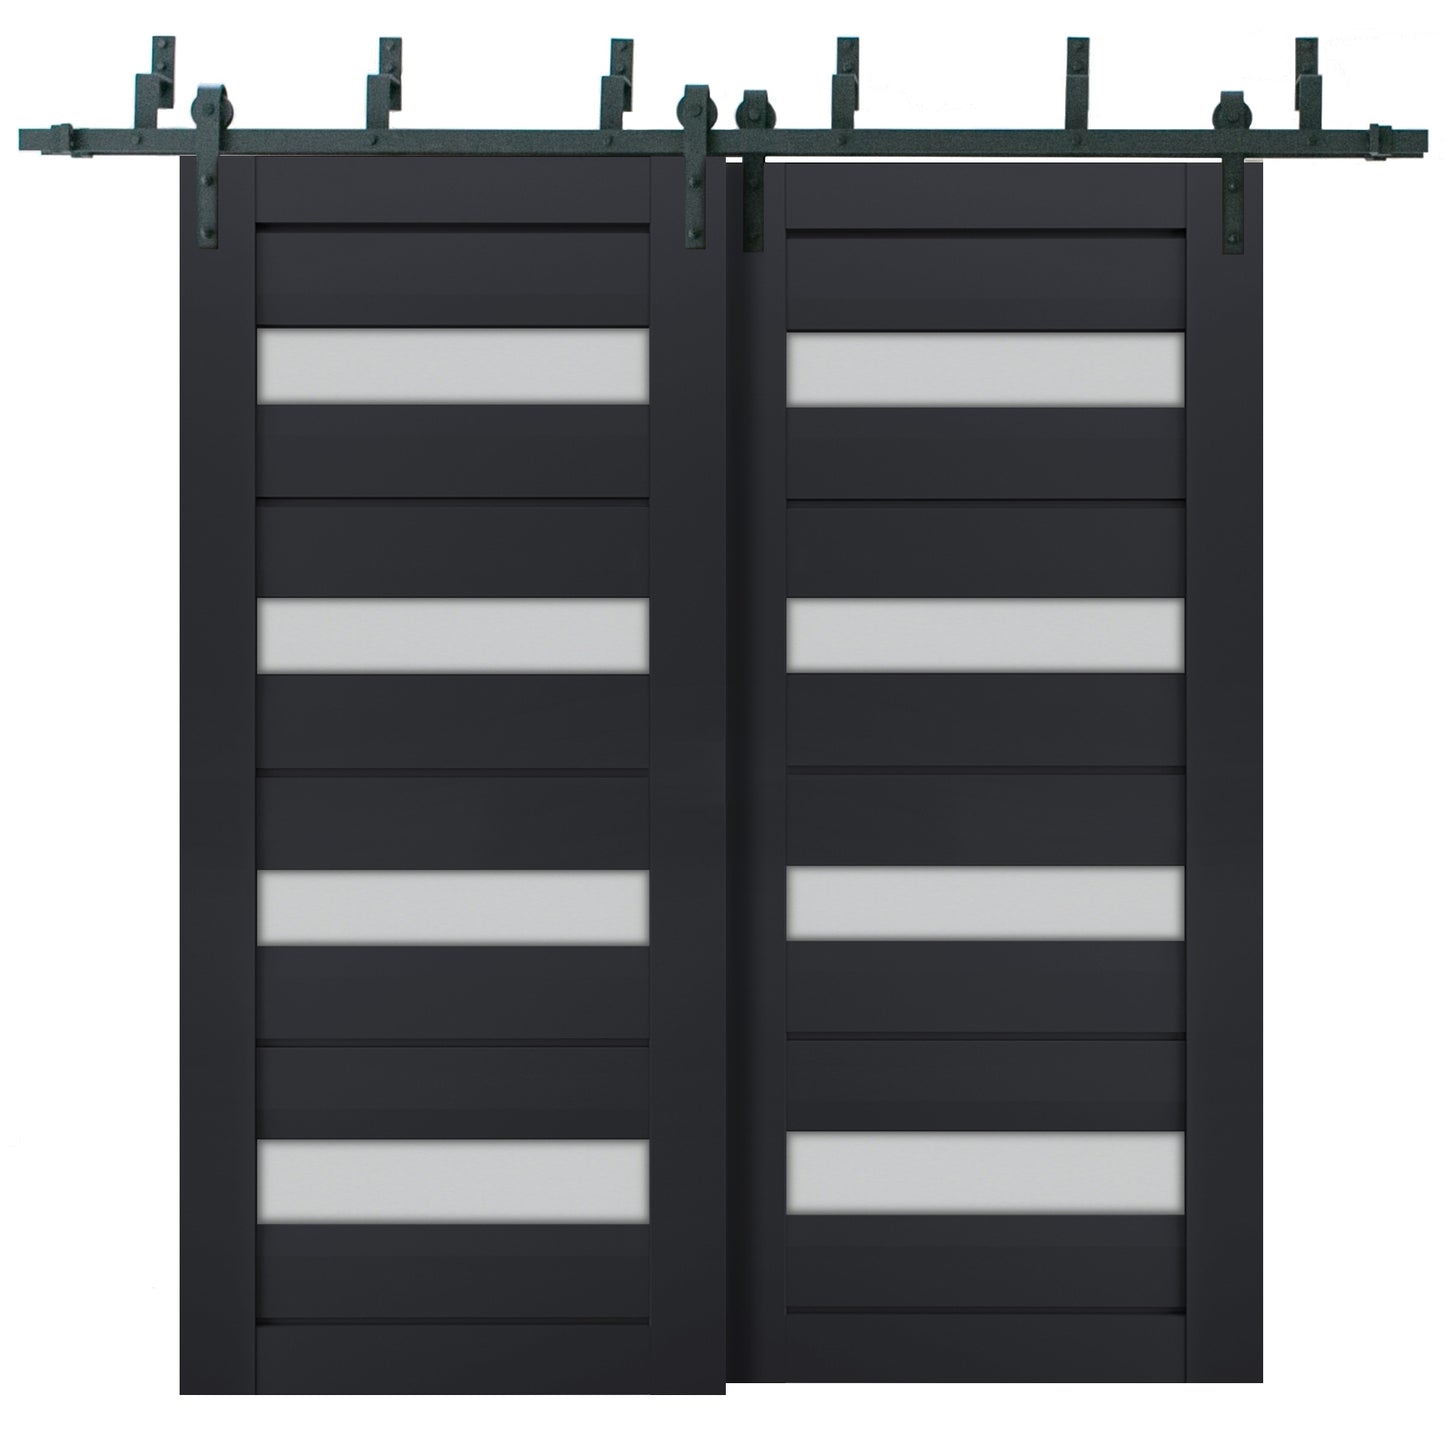 Veregio 7455 Antracite Double Barn Door with Frosted Glass and Black Bypass Rail